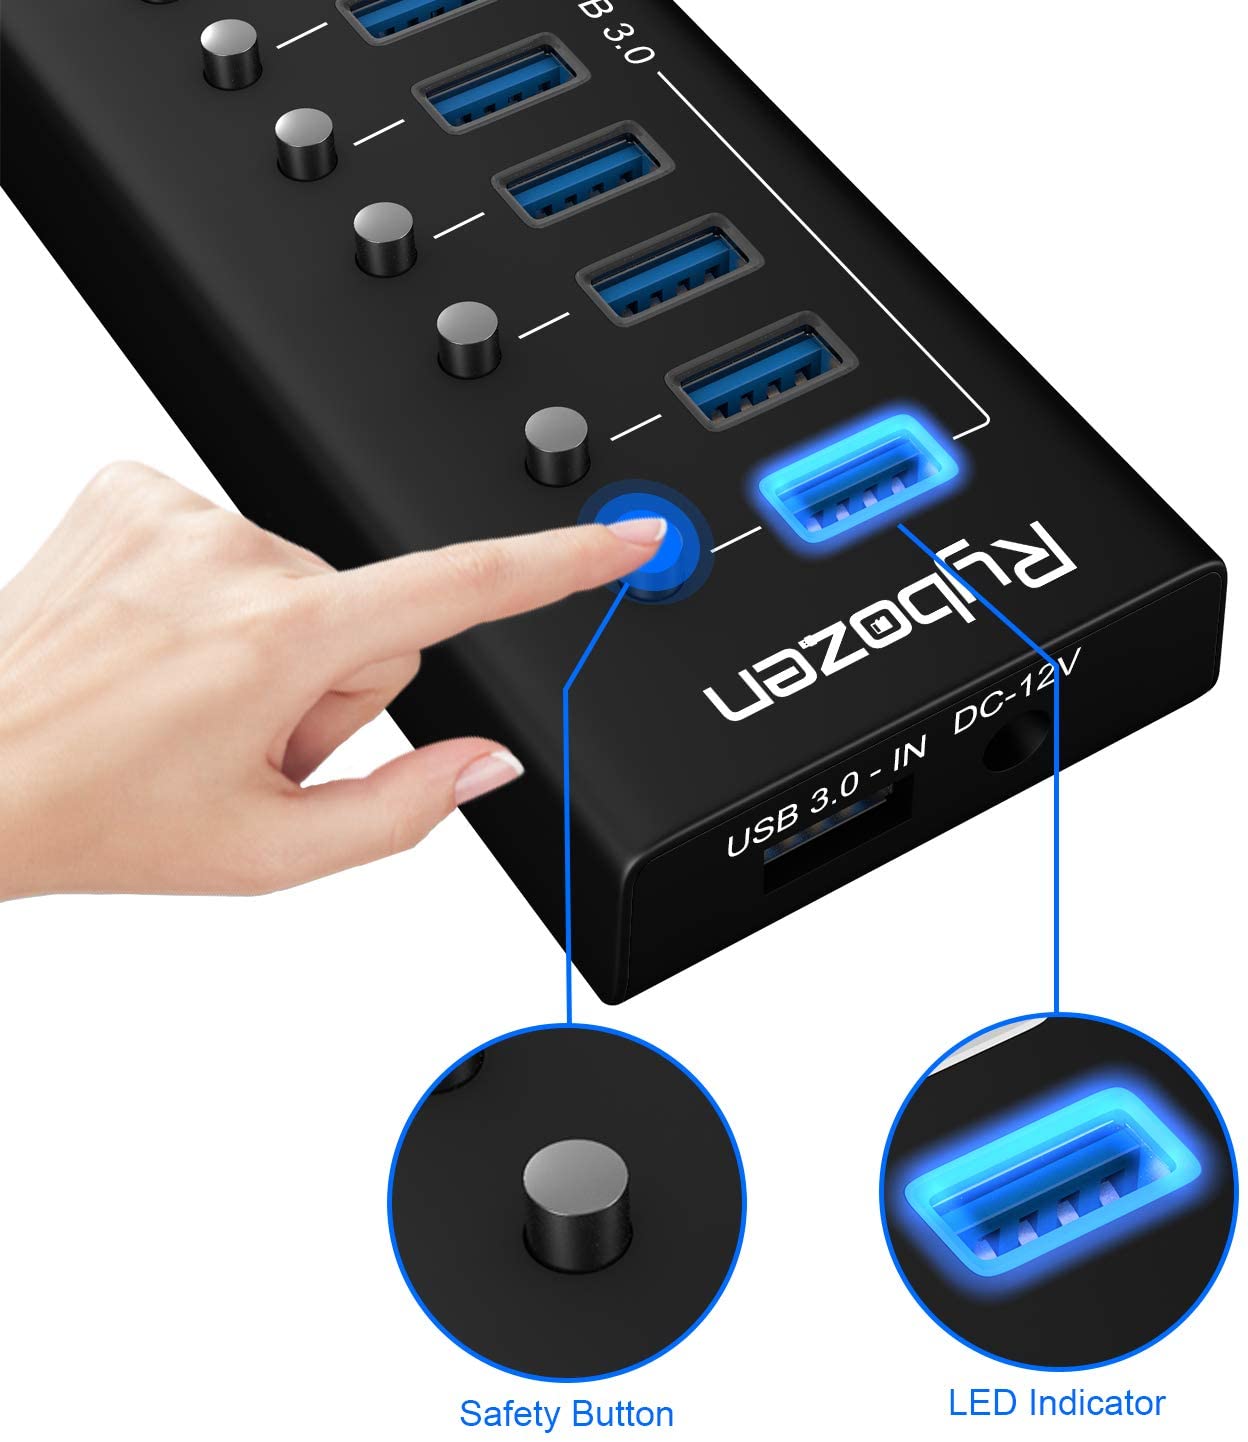 with Blue LED Indicator USB Hub 3.0 Splitter for Multiple Devices ith DC 5V Power Plug